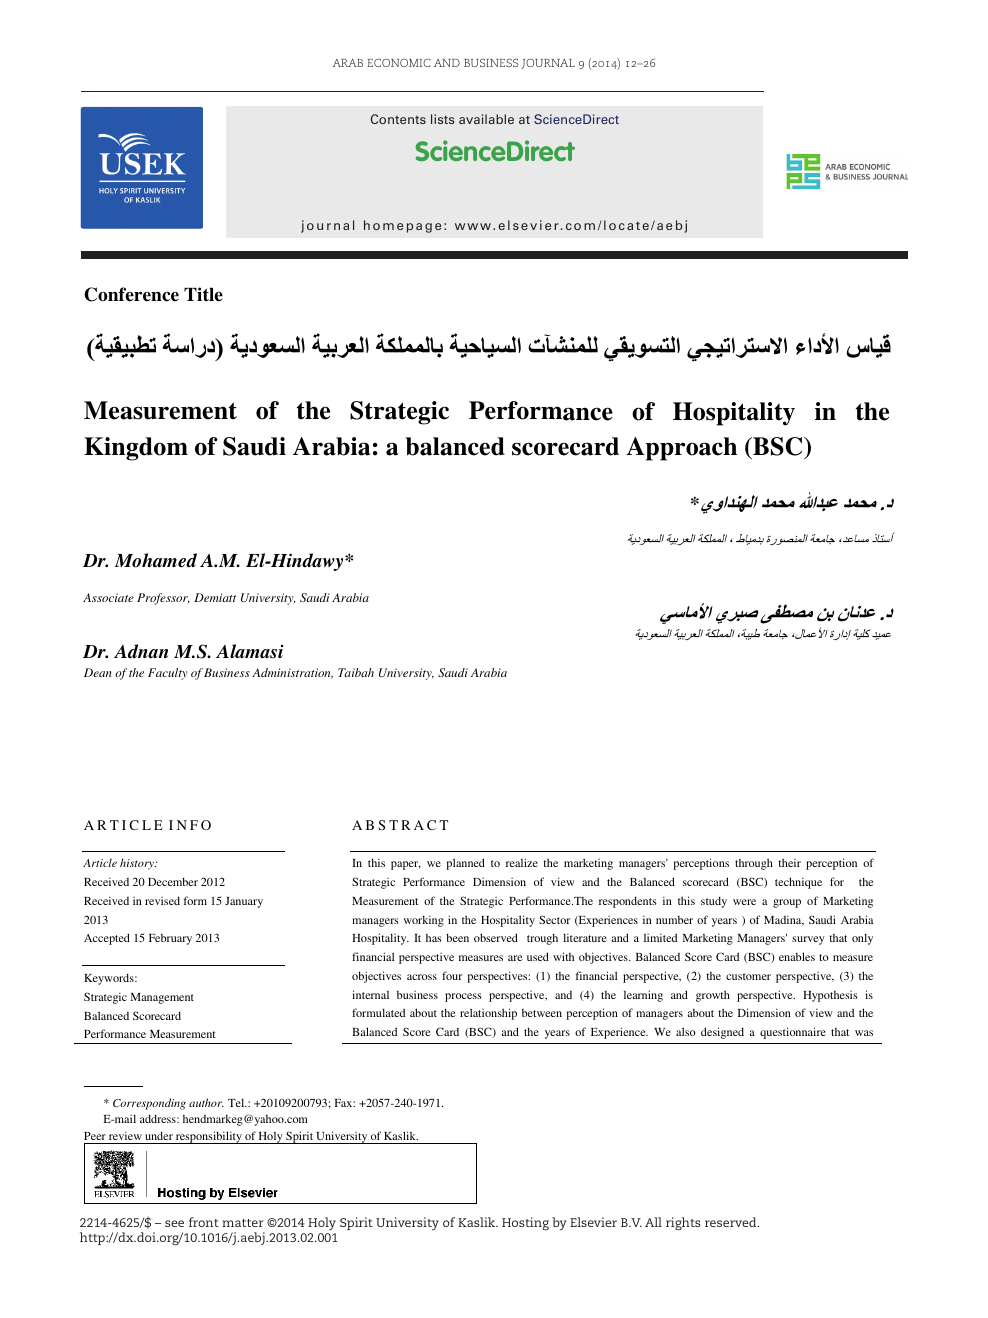 Measurement Of The Strategic Performance Of Hospitality In The Kingdom Of Saudi Arabia A Balanced Scorecard Approach Bsc Topic Of Research Paper In Economics And Business Download Scholarly Article Pdf And